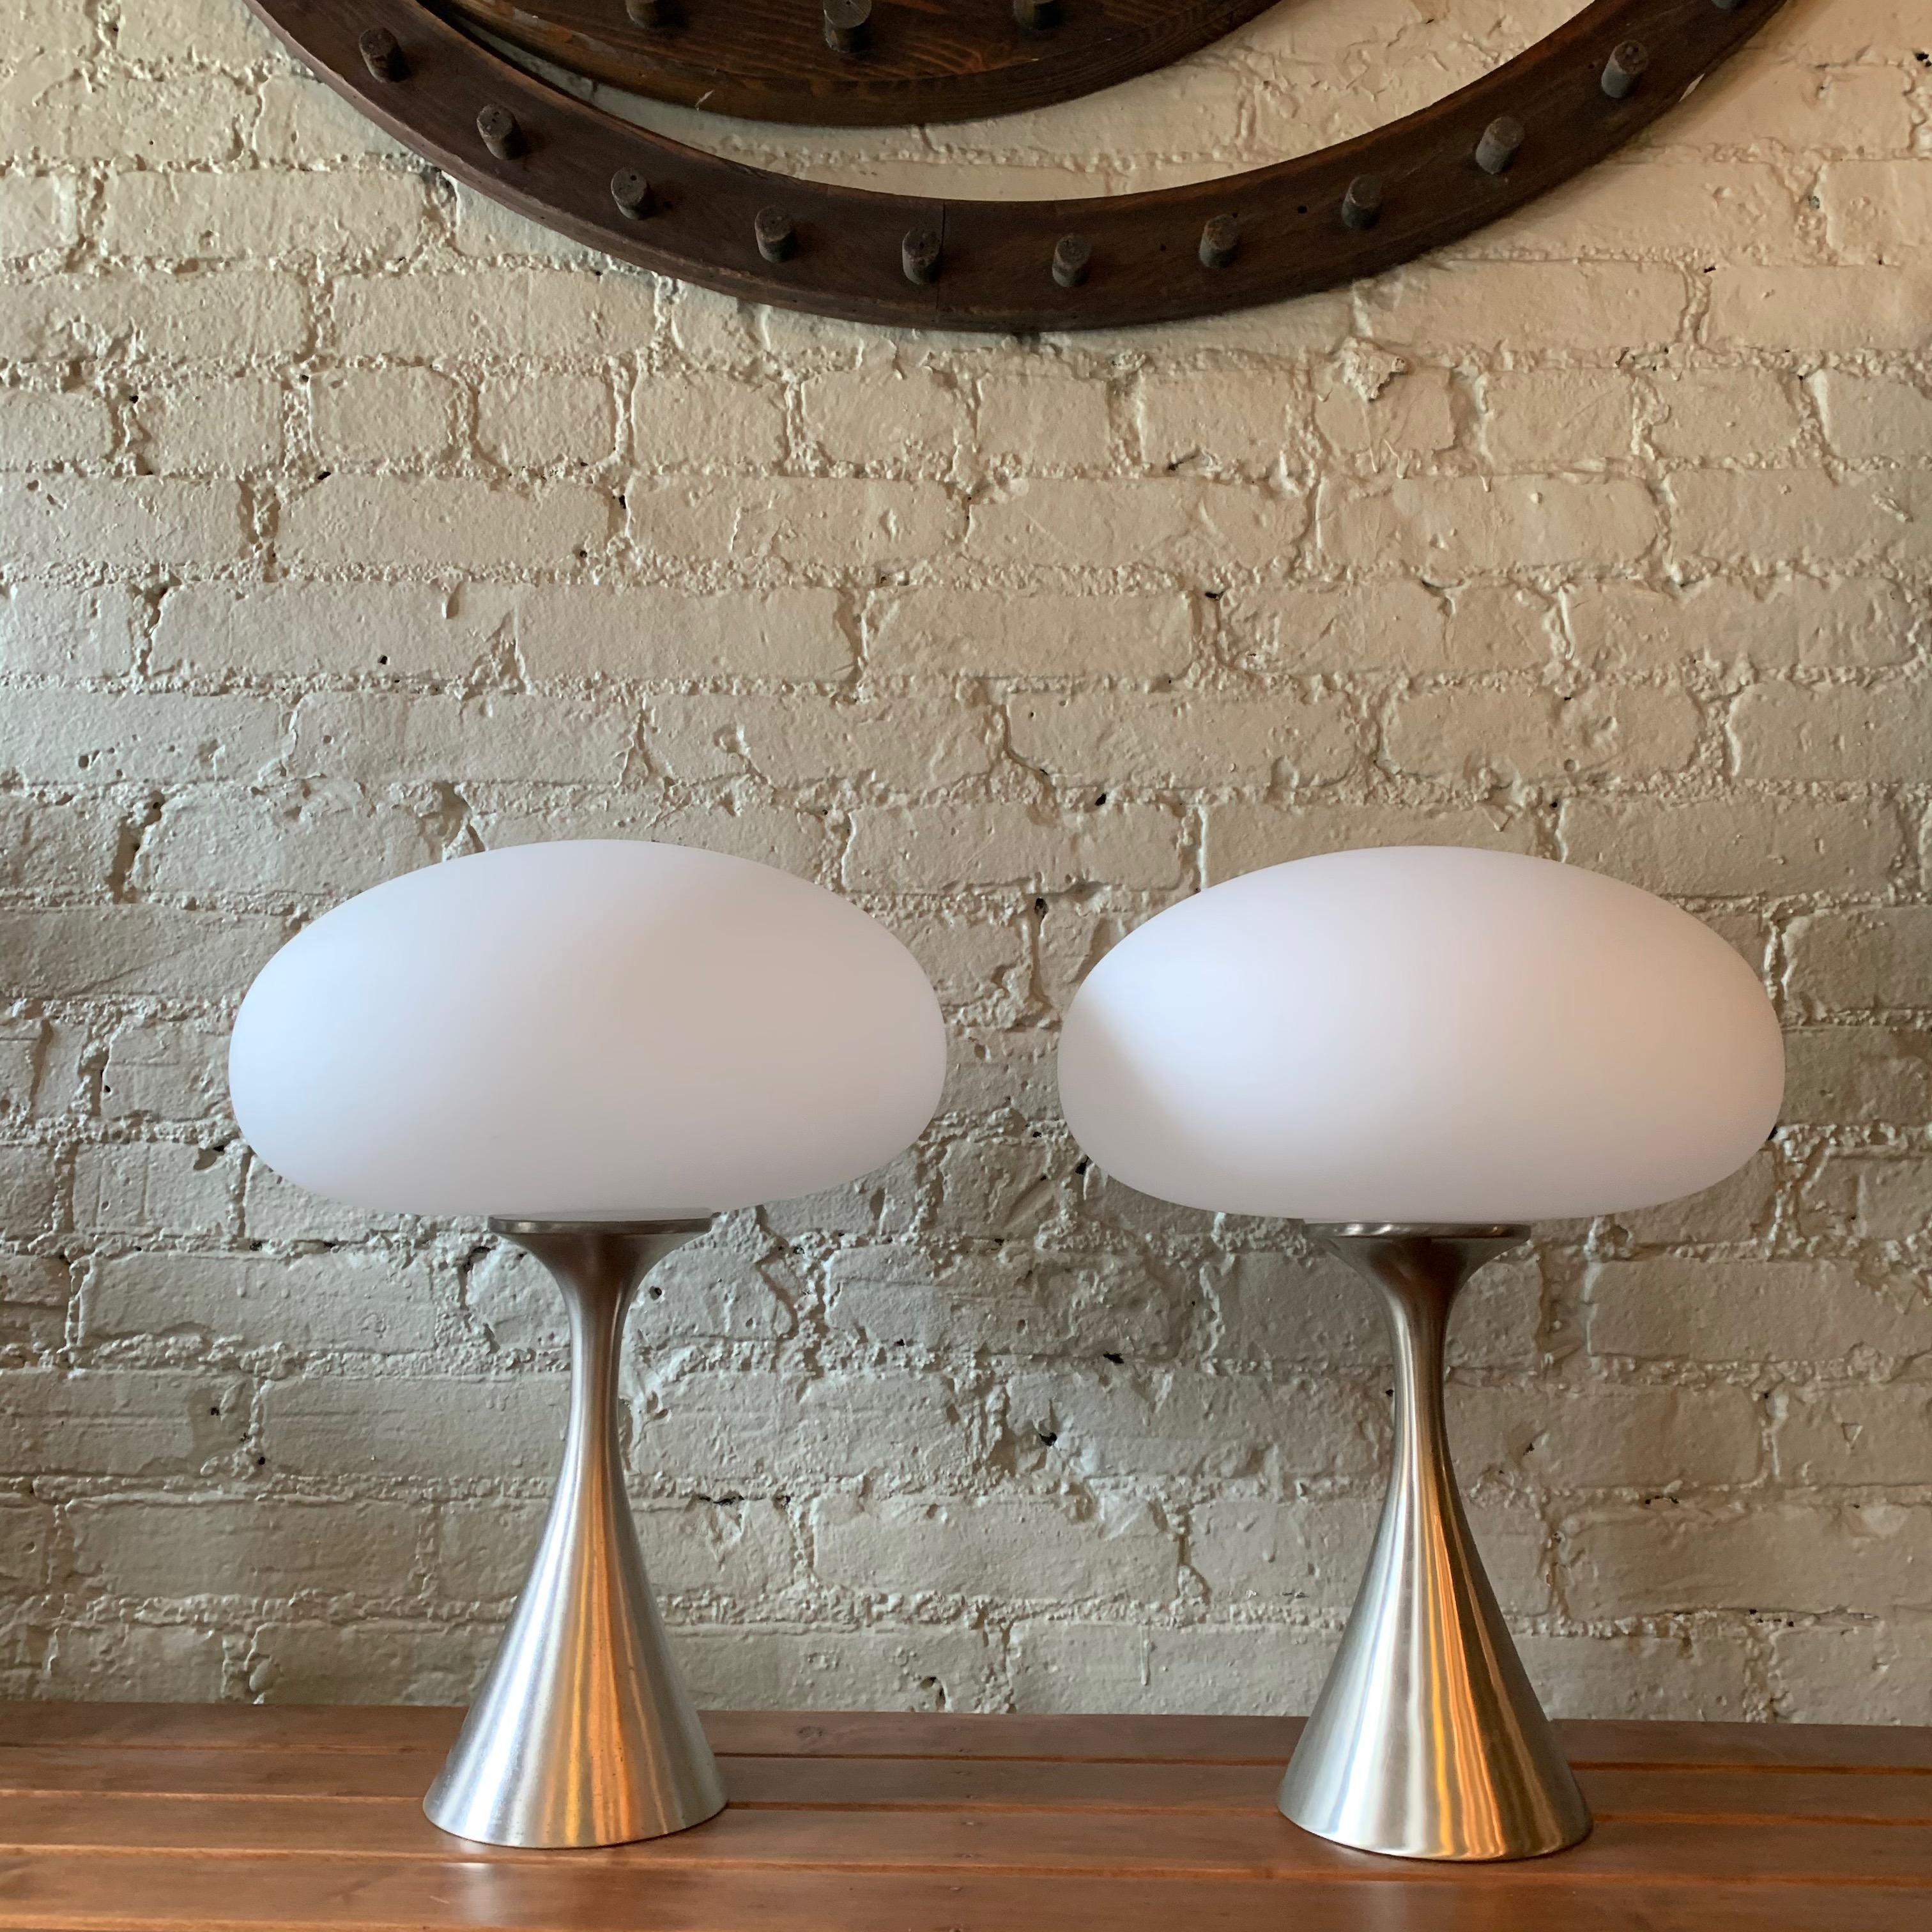 Pair of Classic, Mid-Century Modern, mushroom table lamps by Bill Curry for Laurel Lamp Company, feature brushed aluminum bases with frosted glass shades.